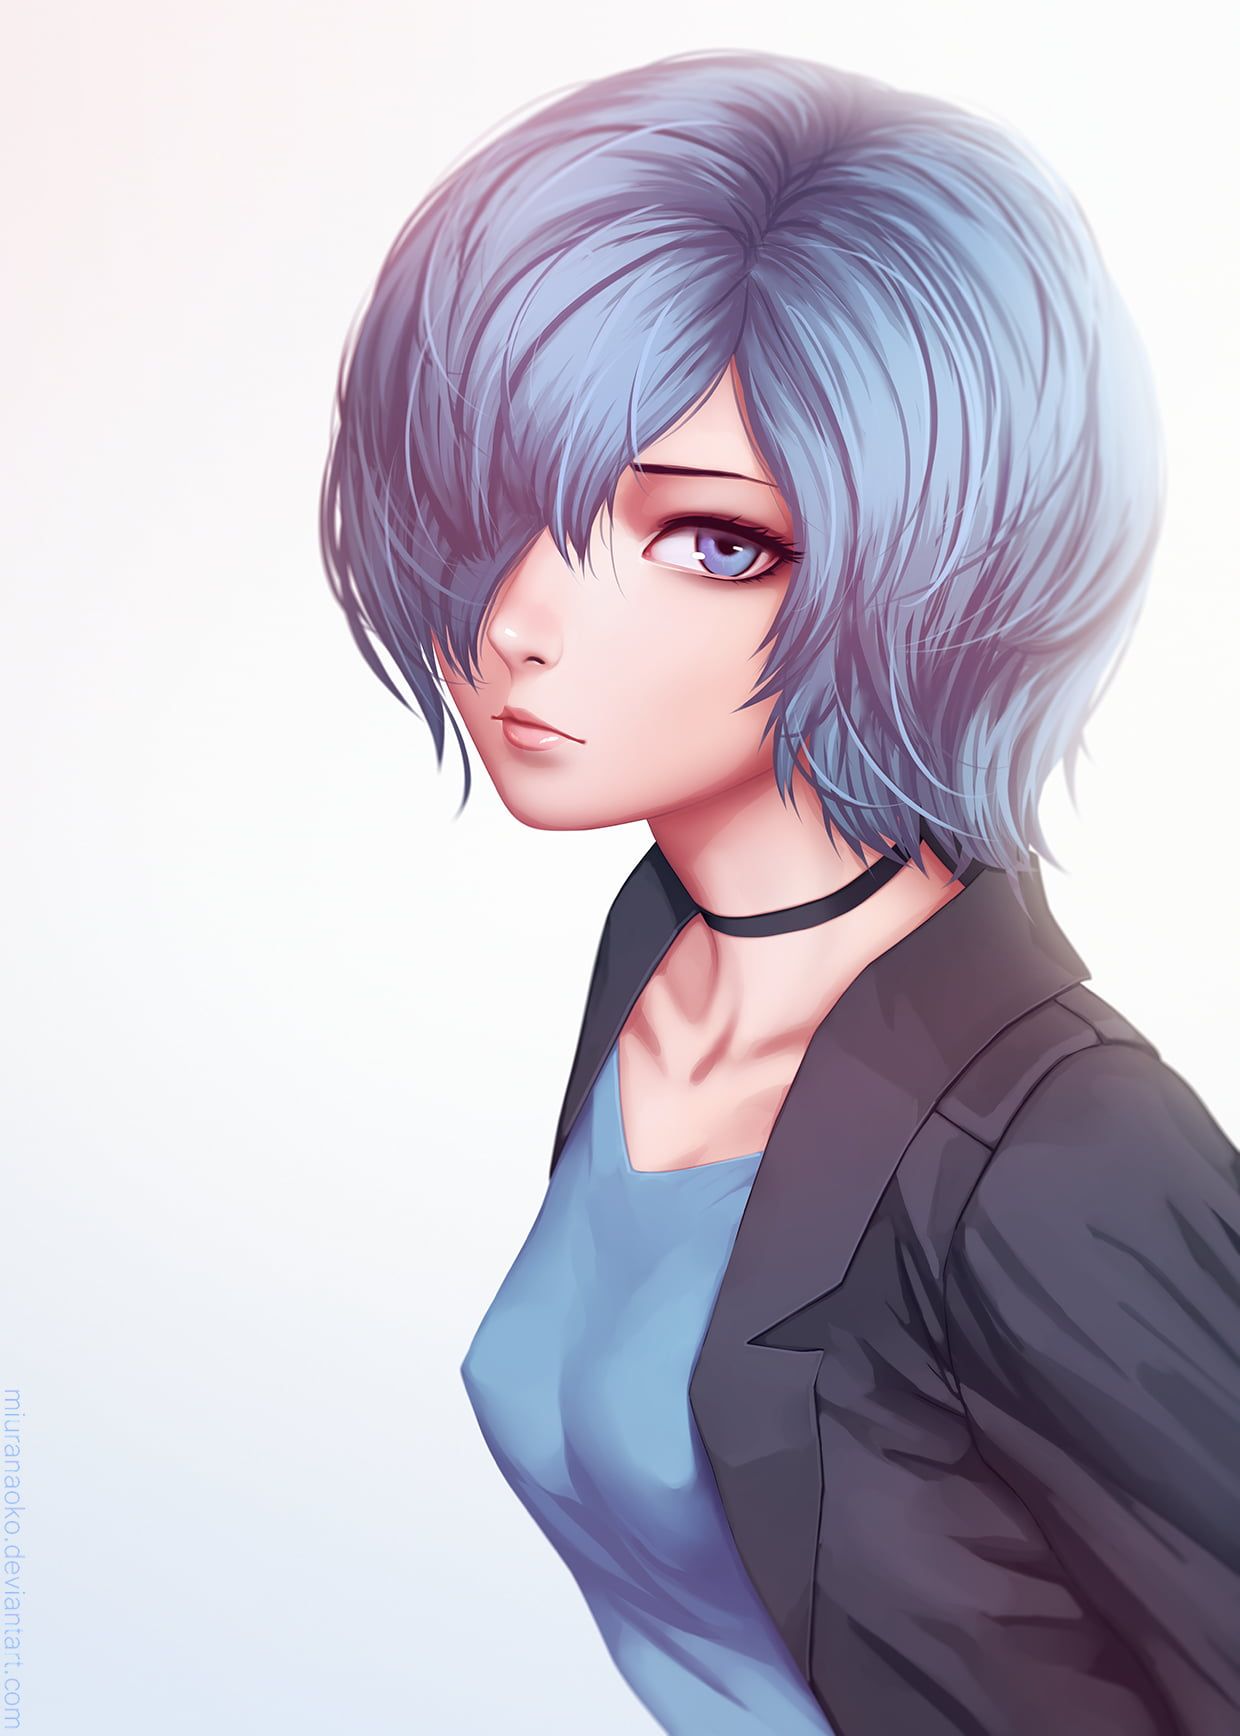 anime girl with short hair and beautiful eyes